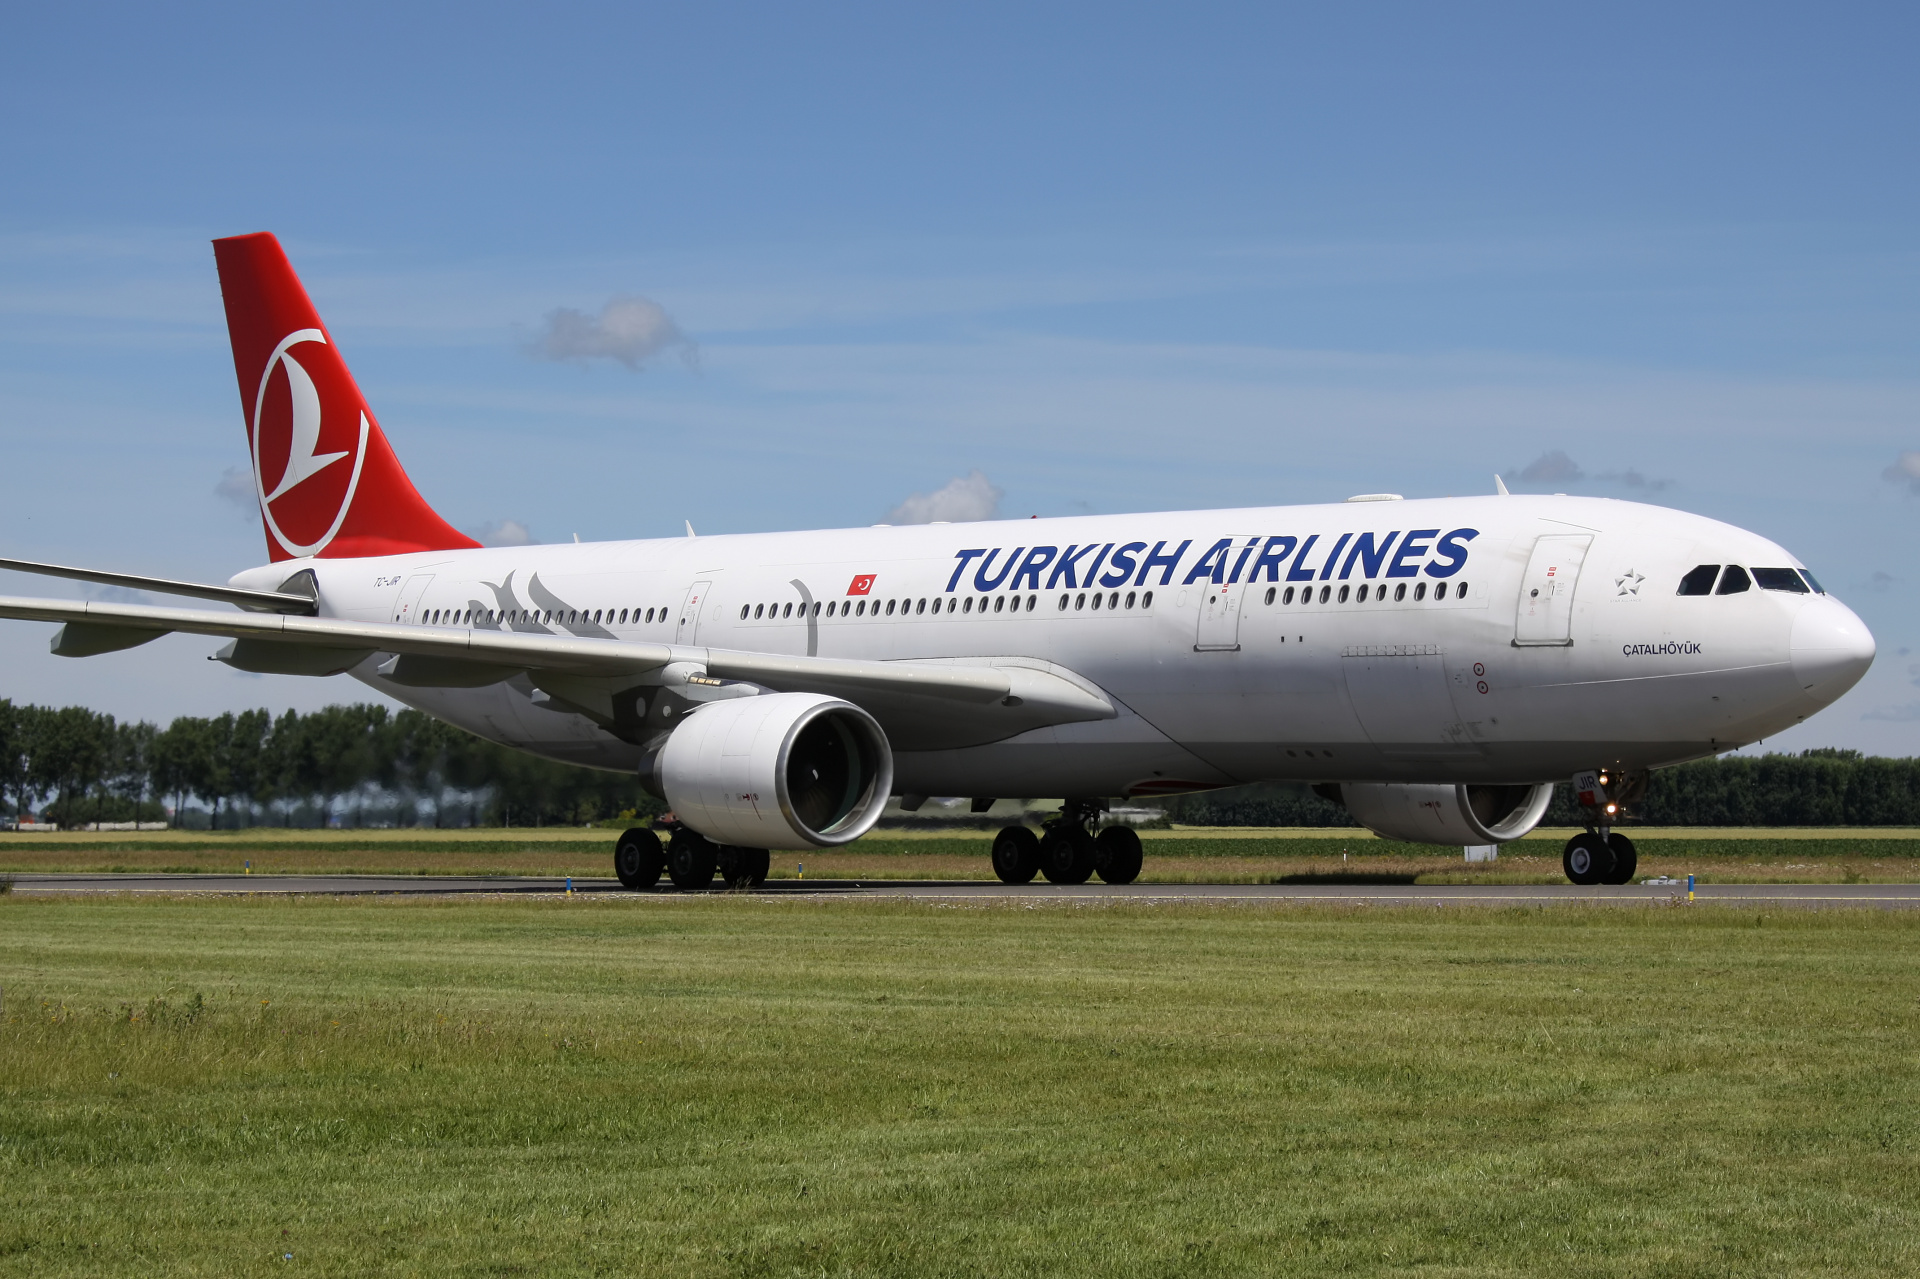 TC-JIR (Aircraft » Schiphol Spotting » Airbus A330-200 » THY Turkish Airlines)